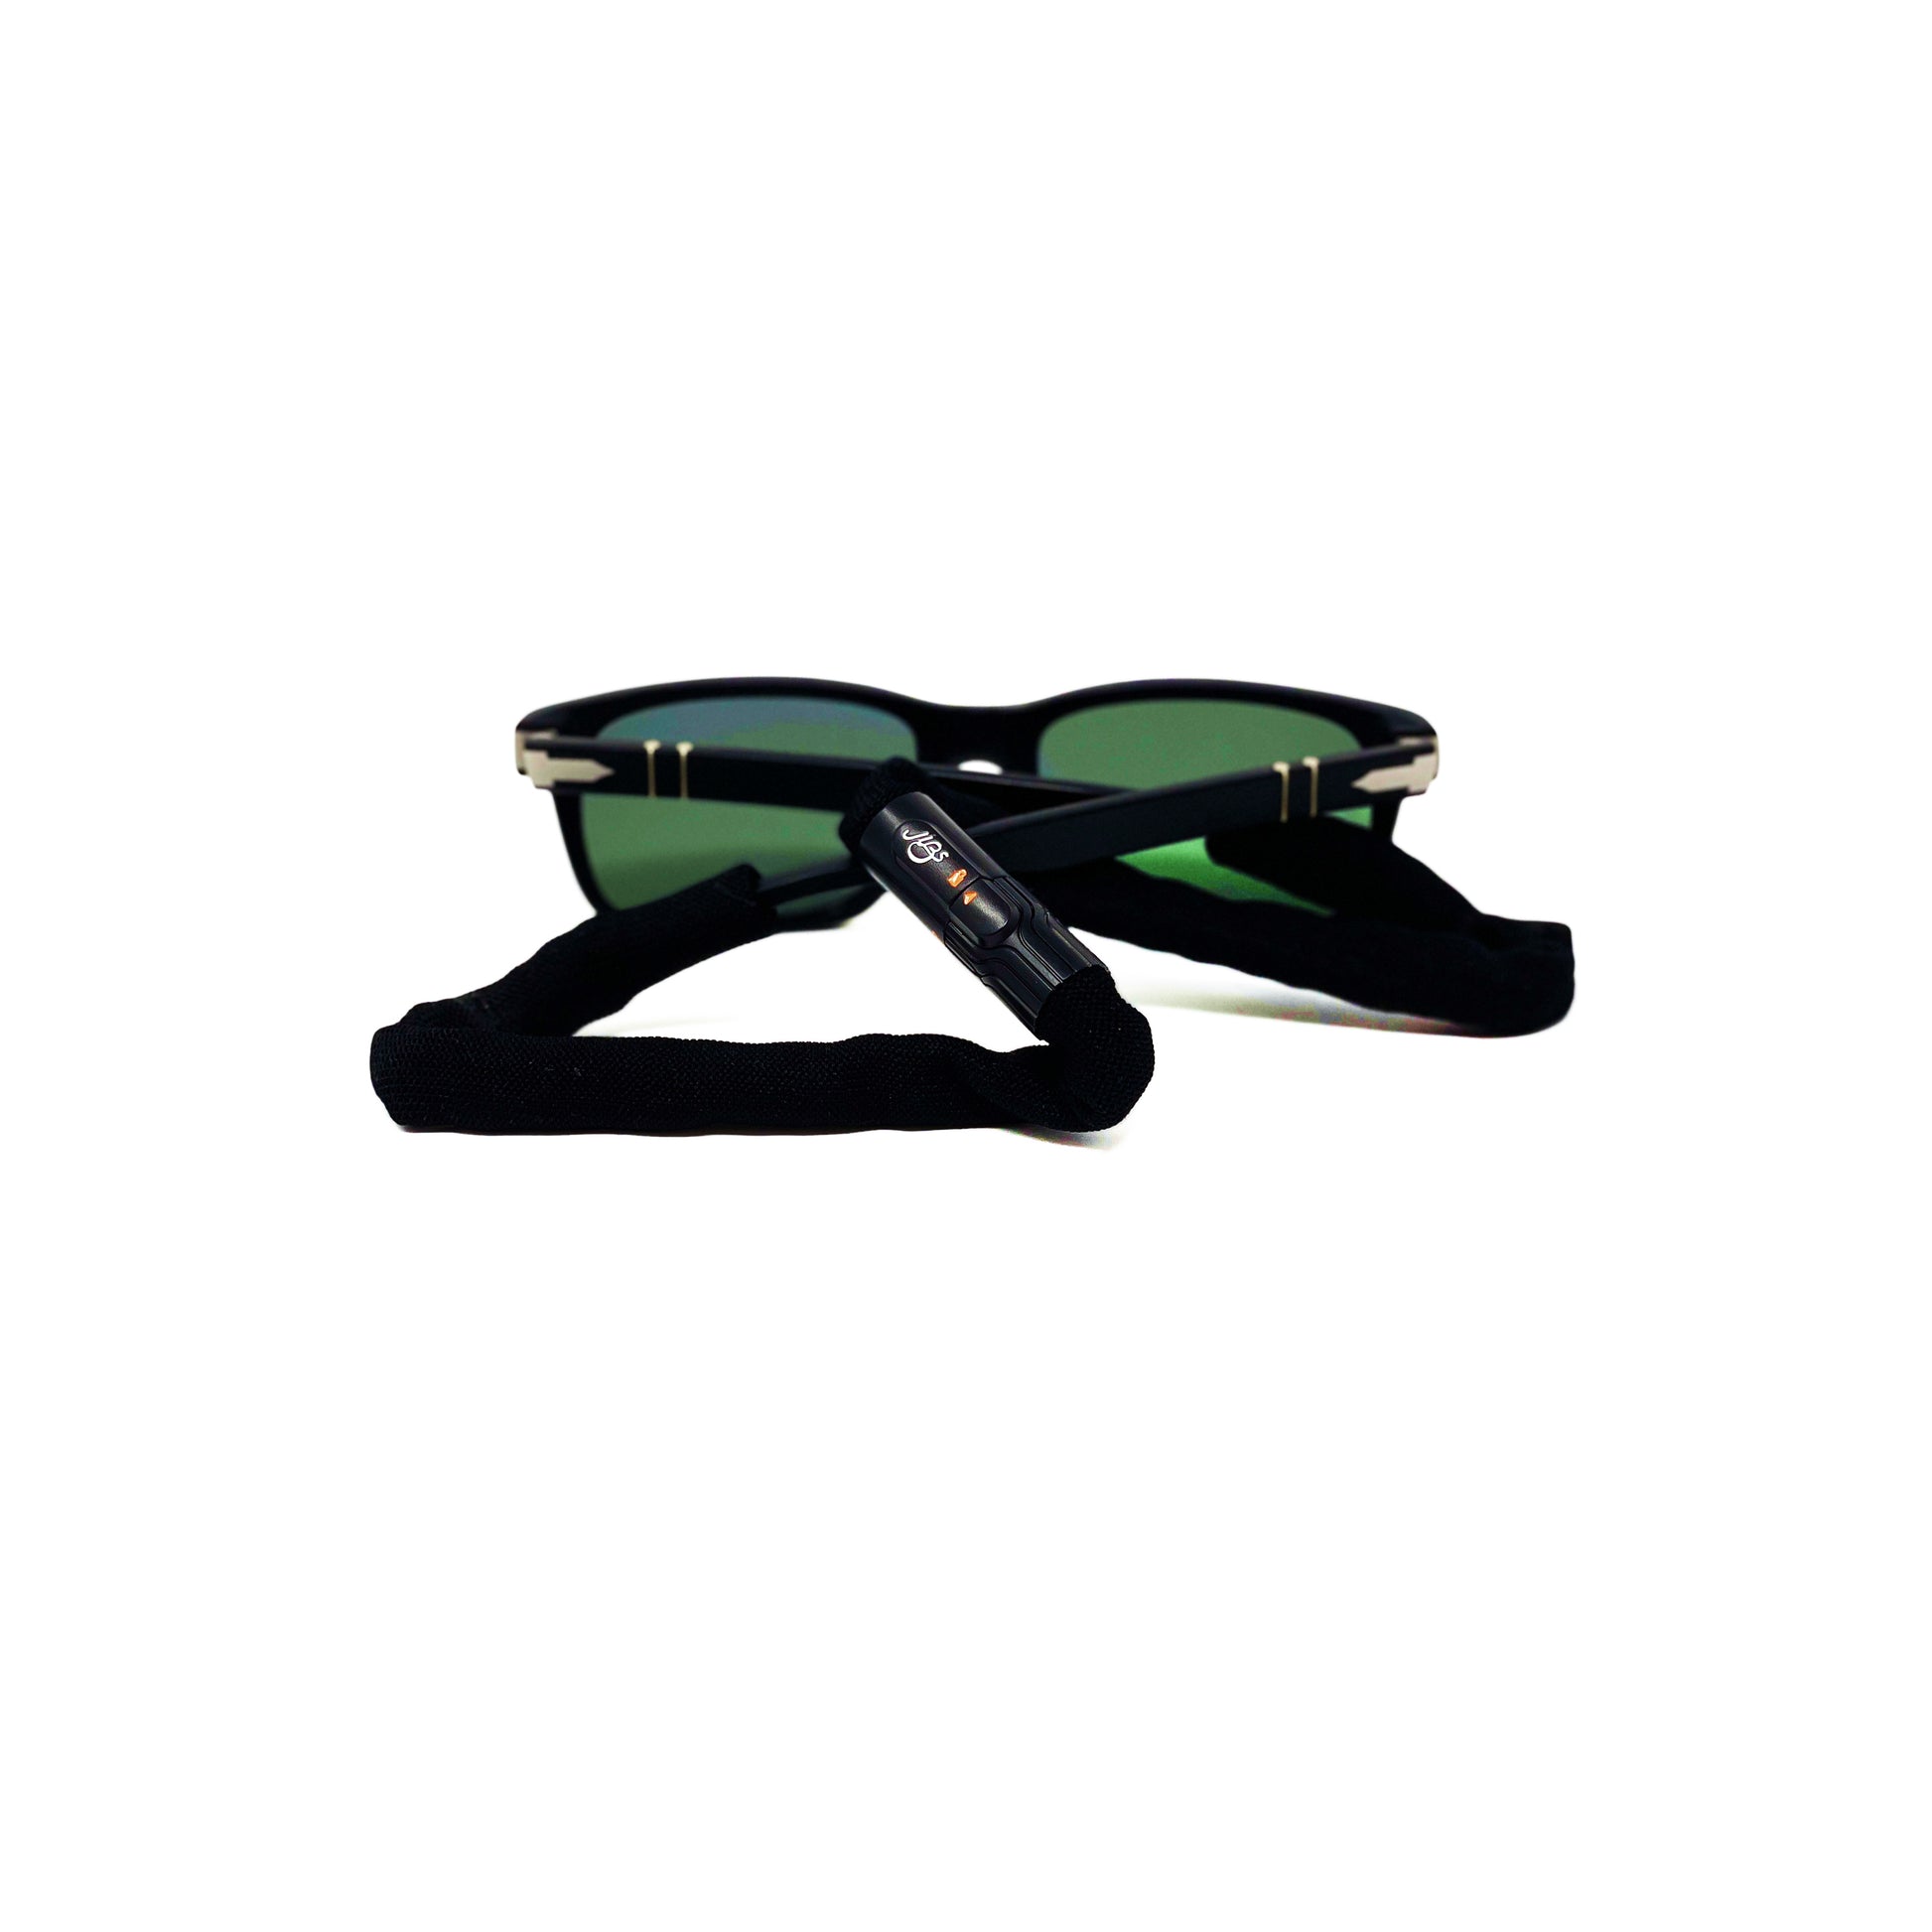 NEW) JIBS Sunglass Strap - Cleans Your Sunglasses Too!